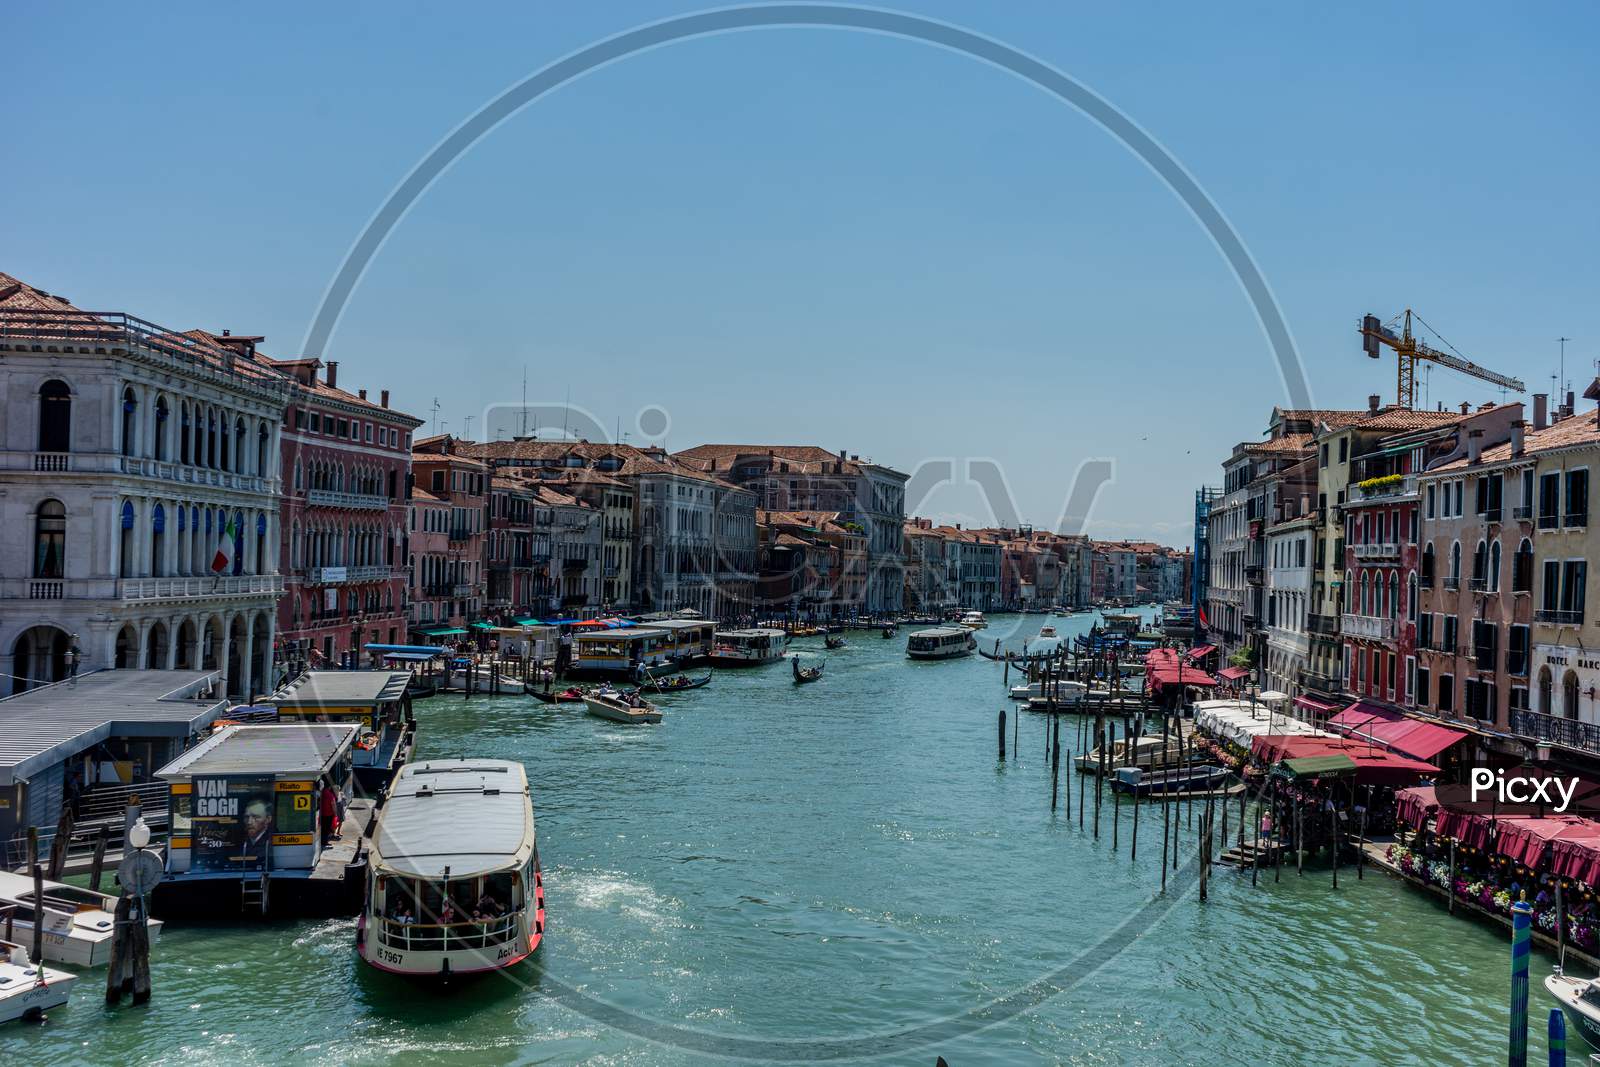 Venice, Italy - 01 July 2018: The Cityscape And Townscape Of Venice Along The Grand Canal In Italy